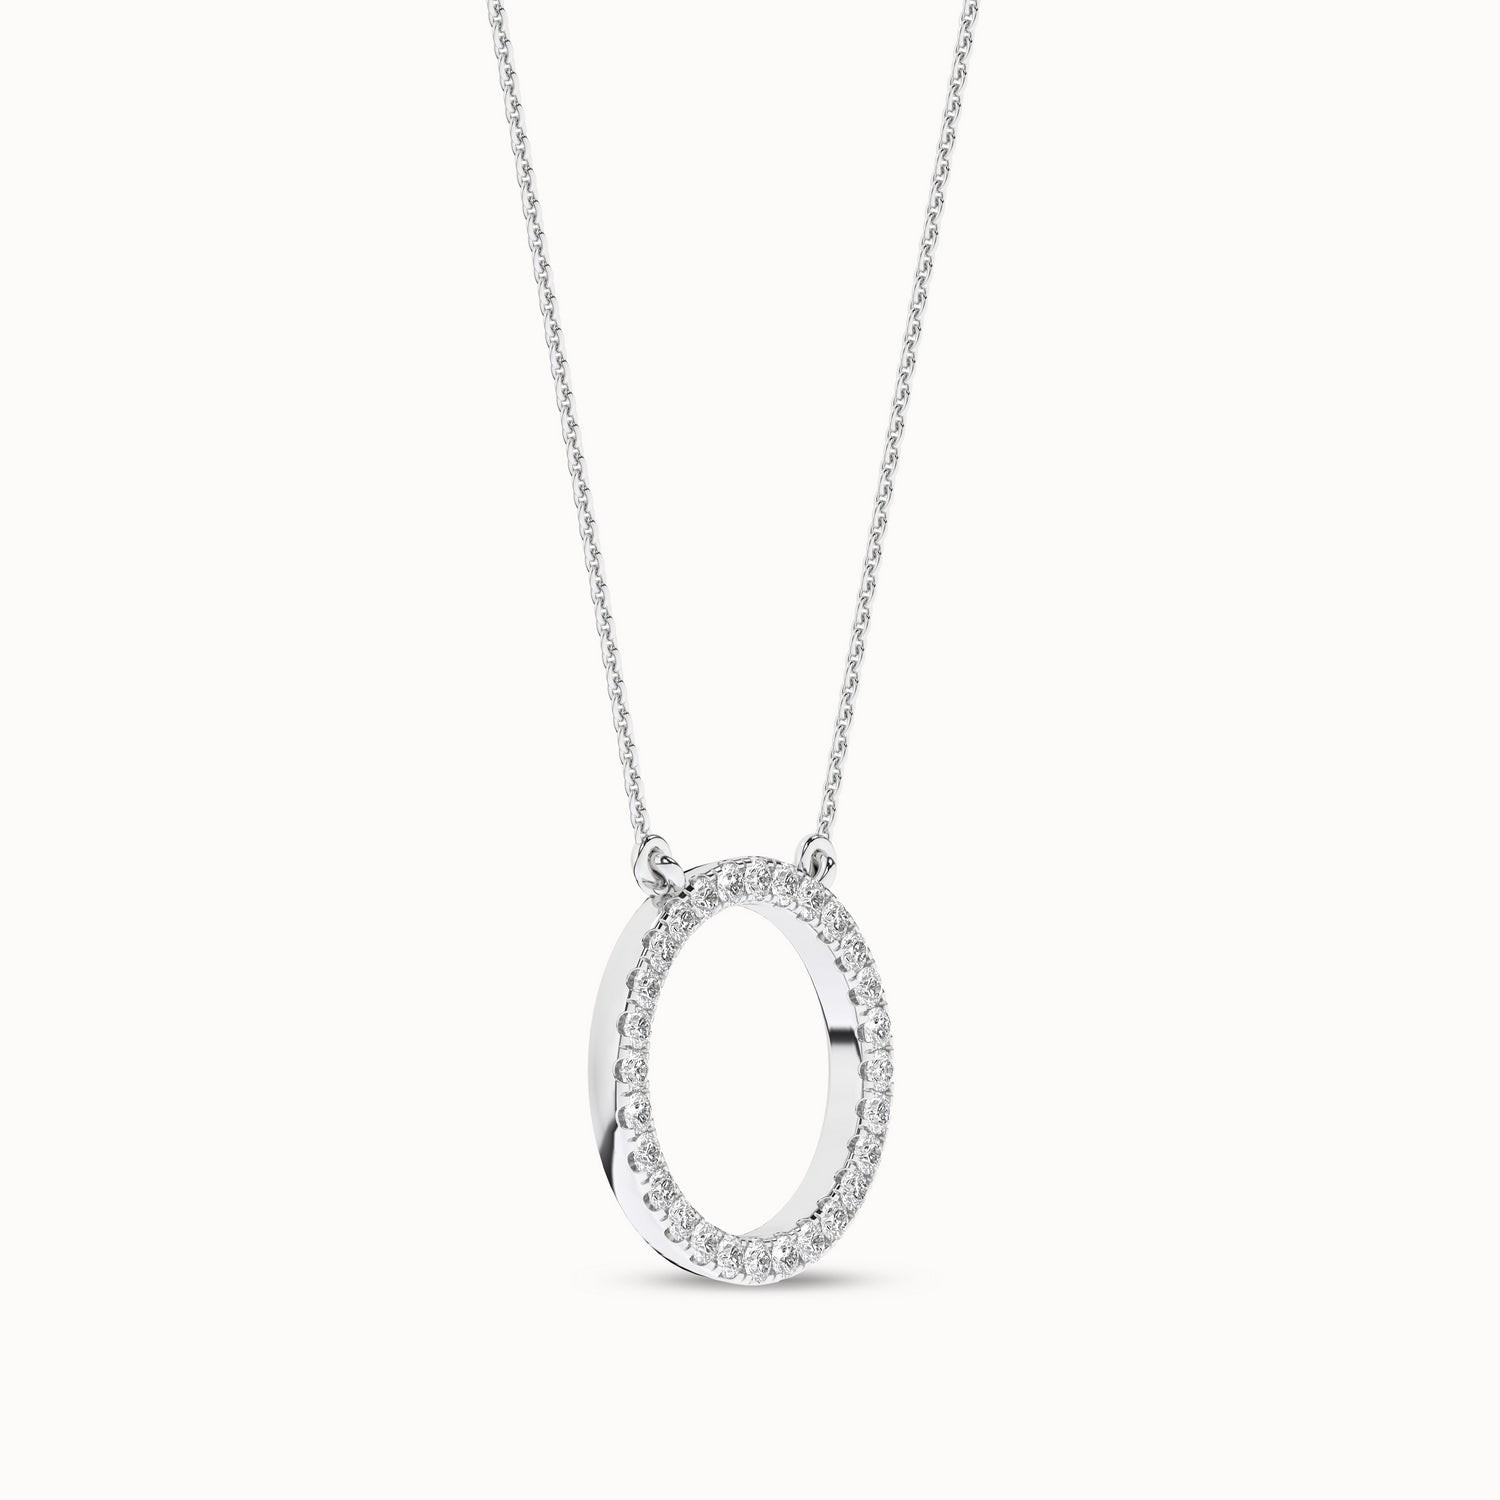 Circular Silhouette Necklace_Product Angle_1/4Ct. - 2